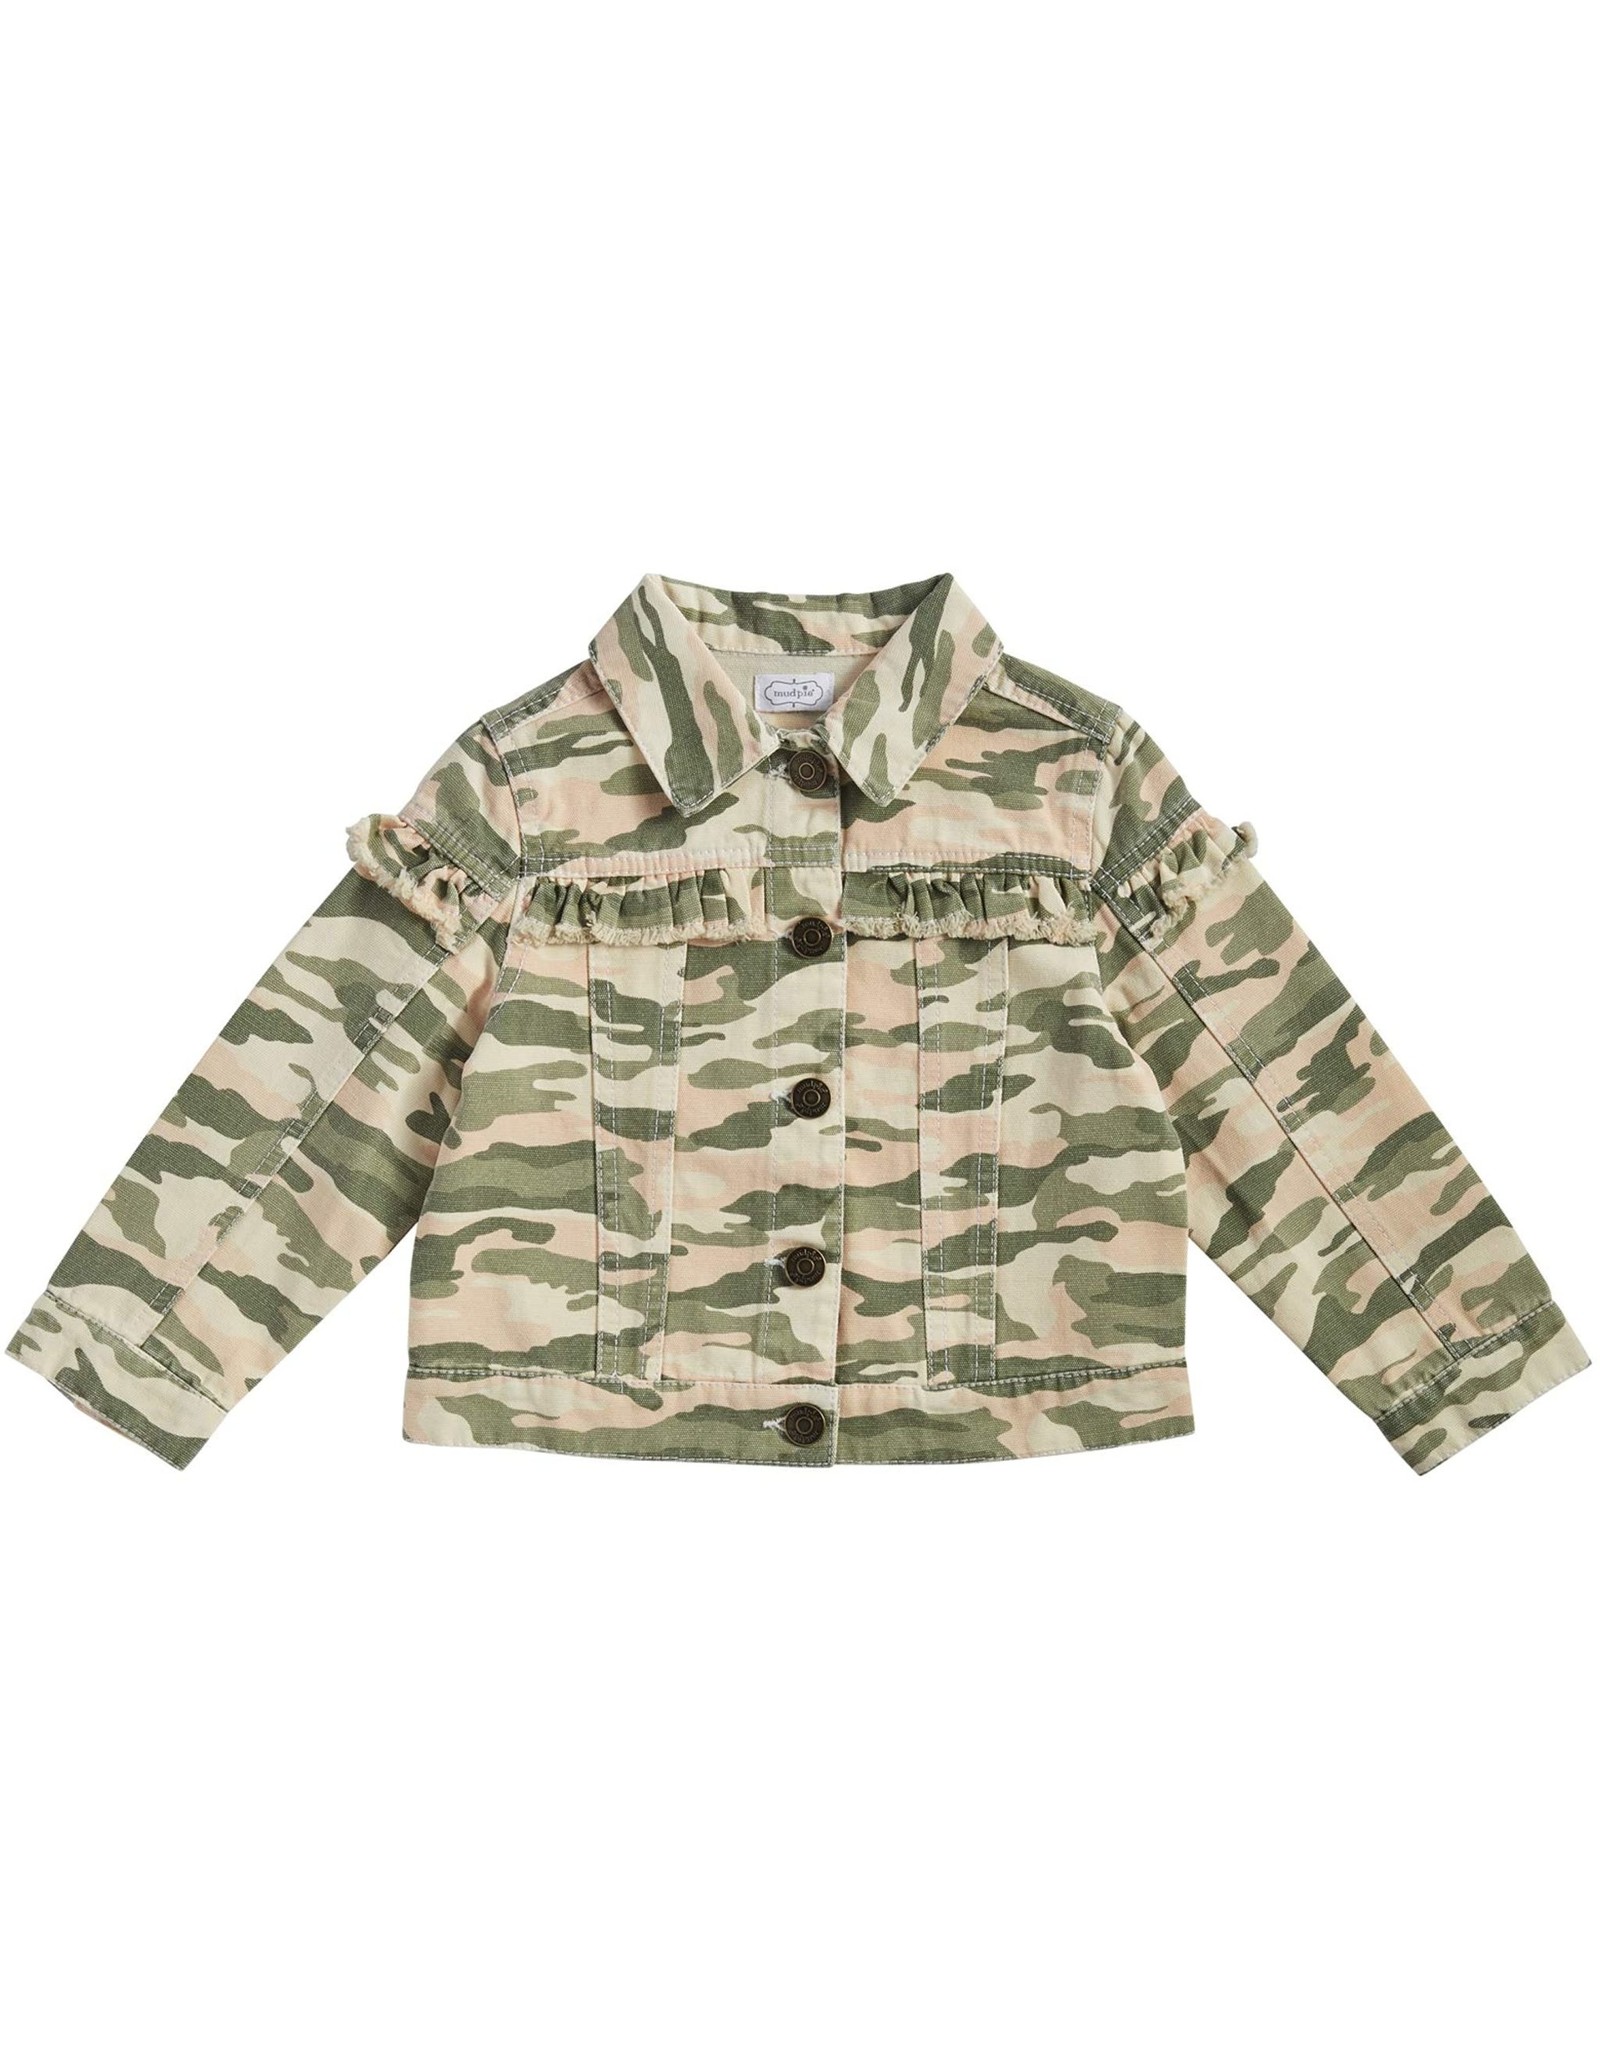 Buy Olive green Jackets & Coats for Boys by MAX Online | Ajio.com